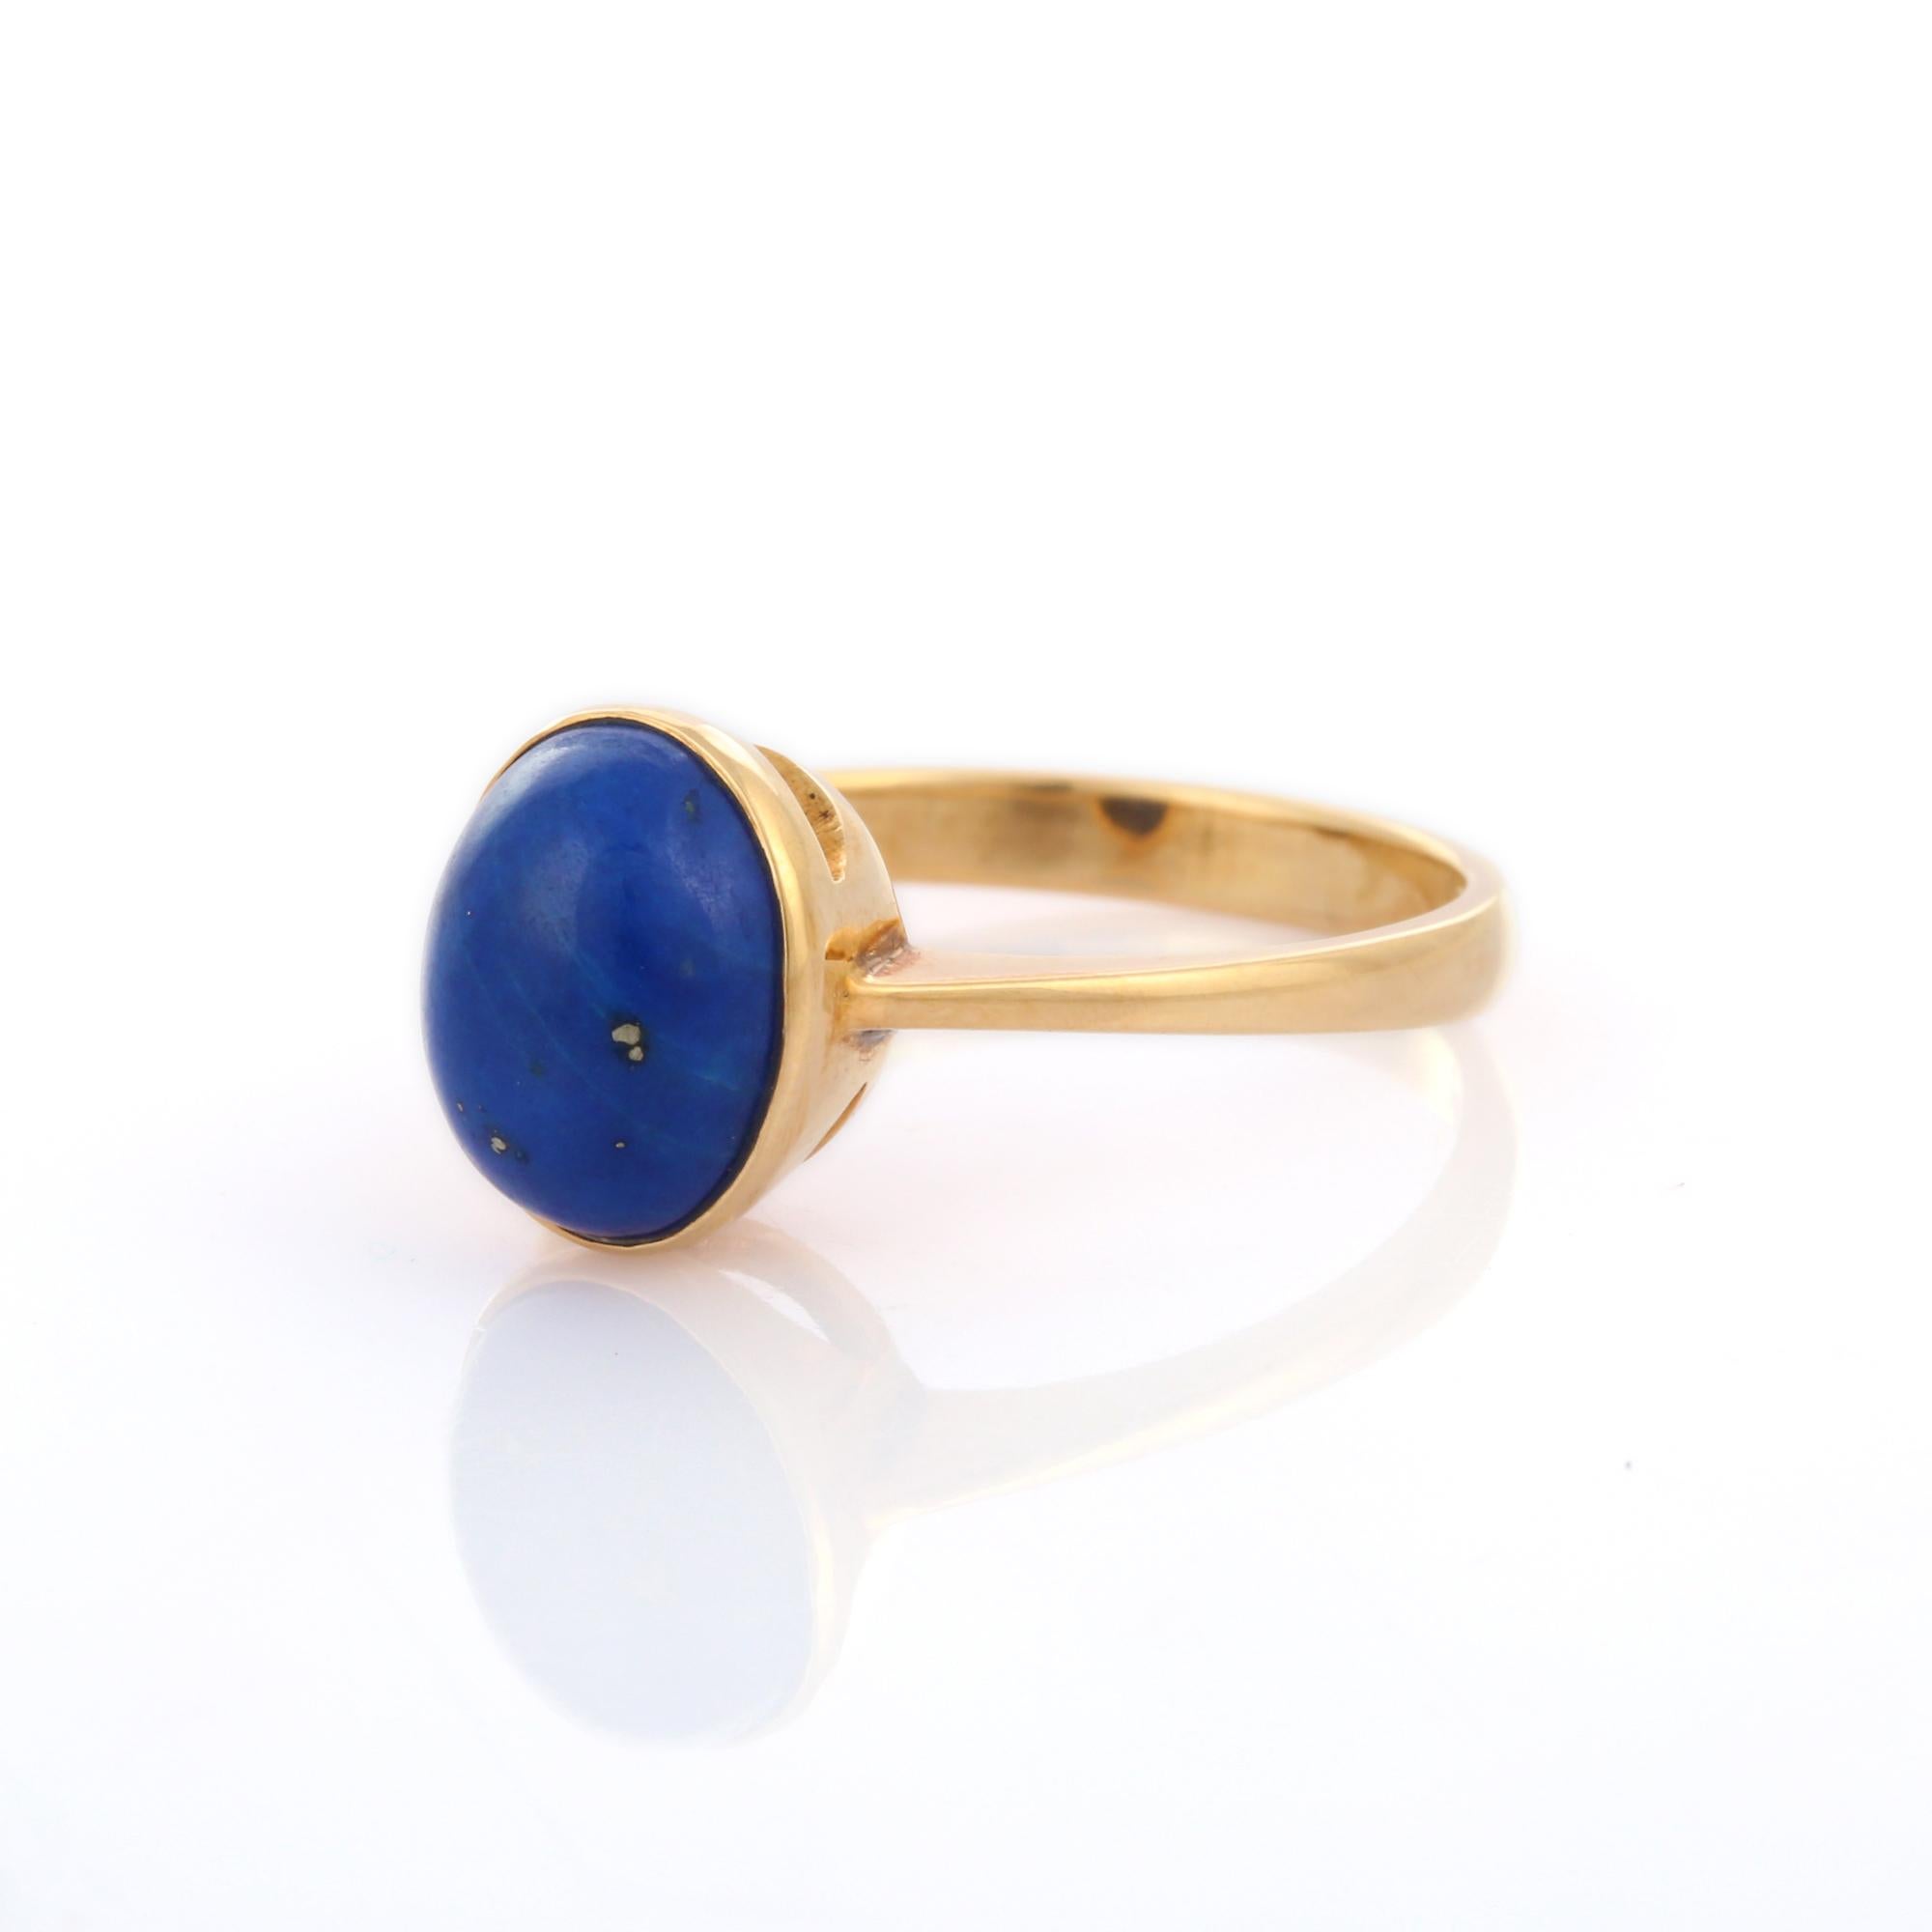 For Sale:  2.87 Carat Lapis Lazuli Solitaire Ring in 18K Yellow Gold  3